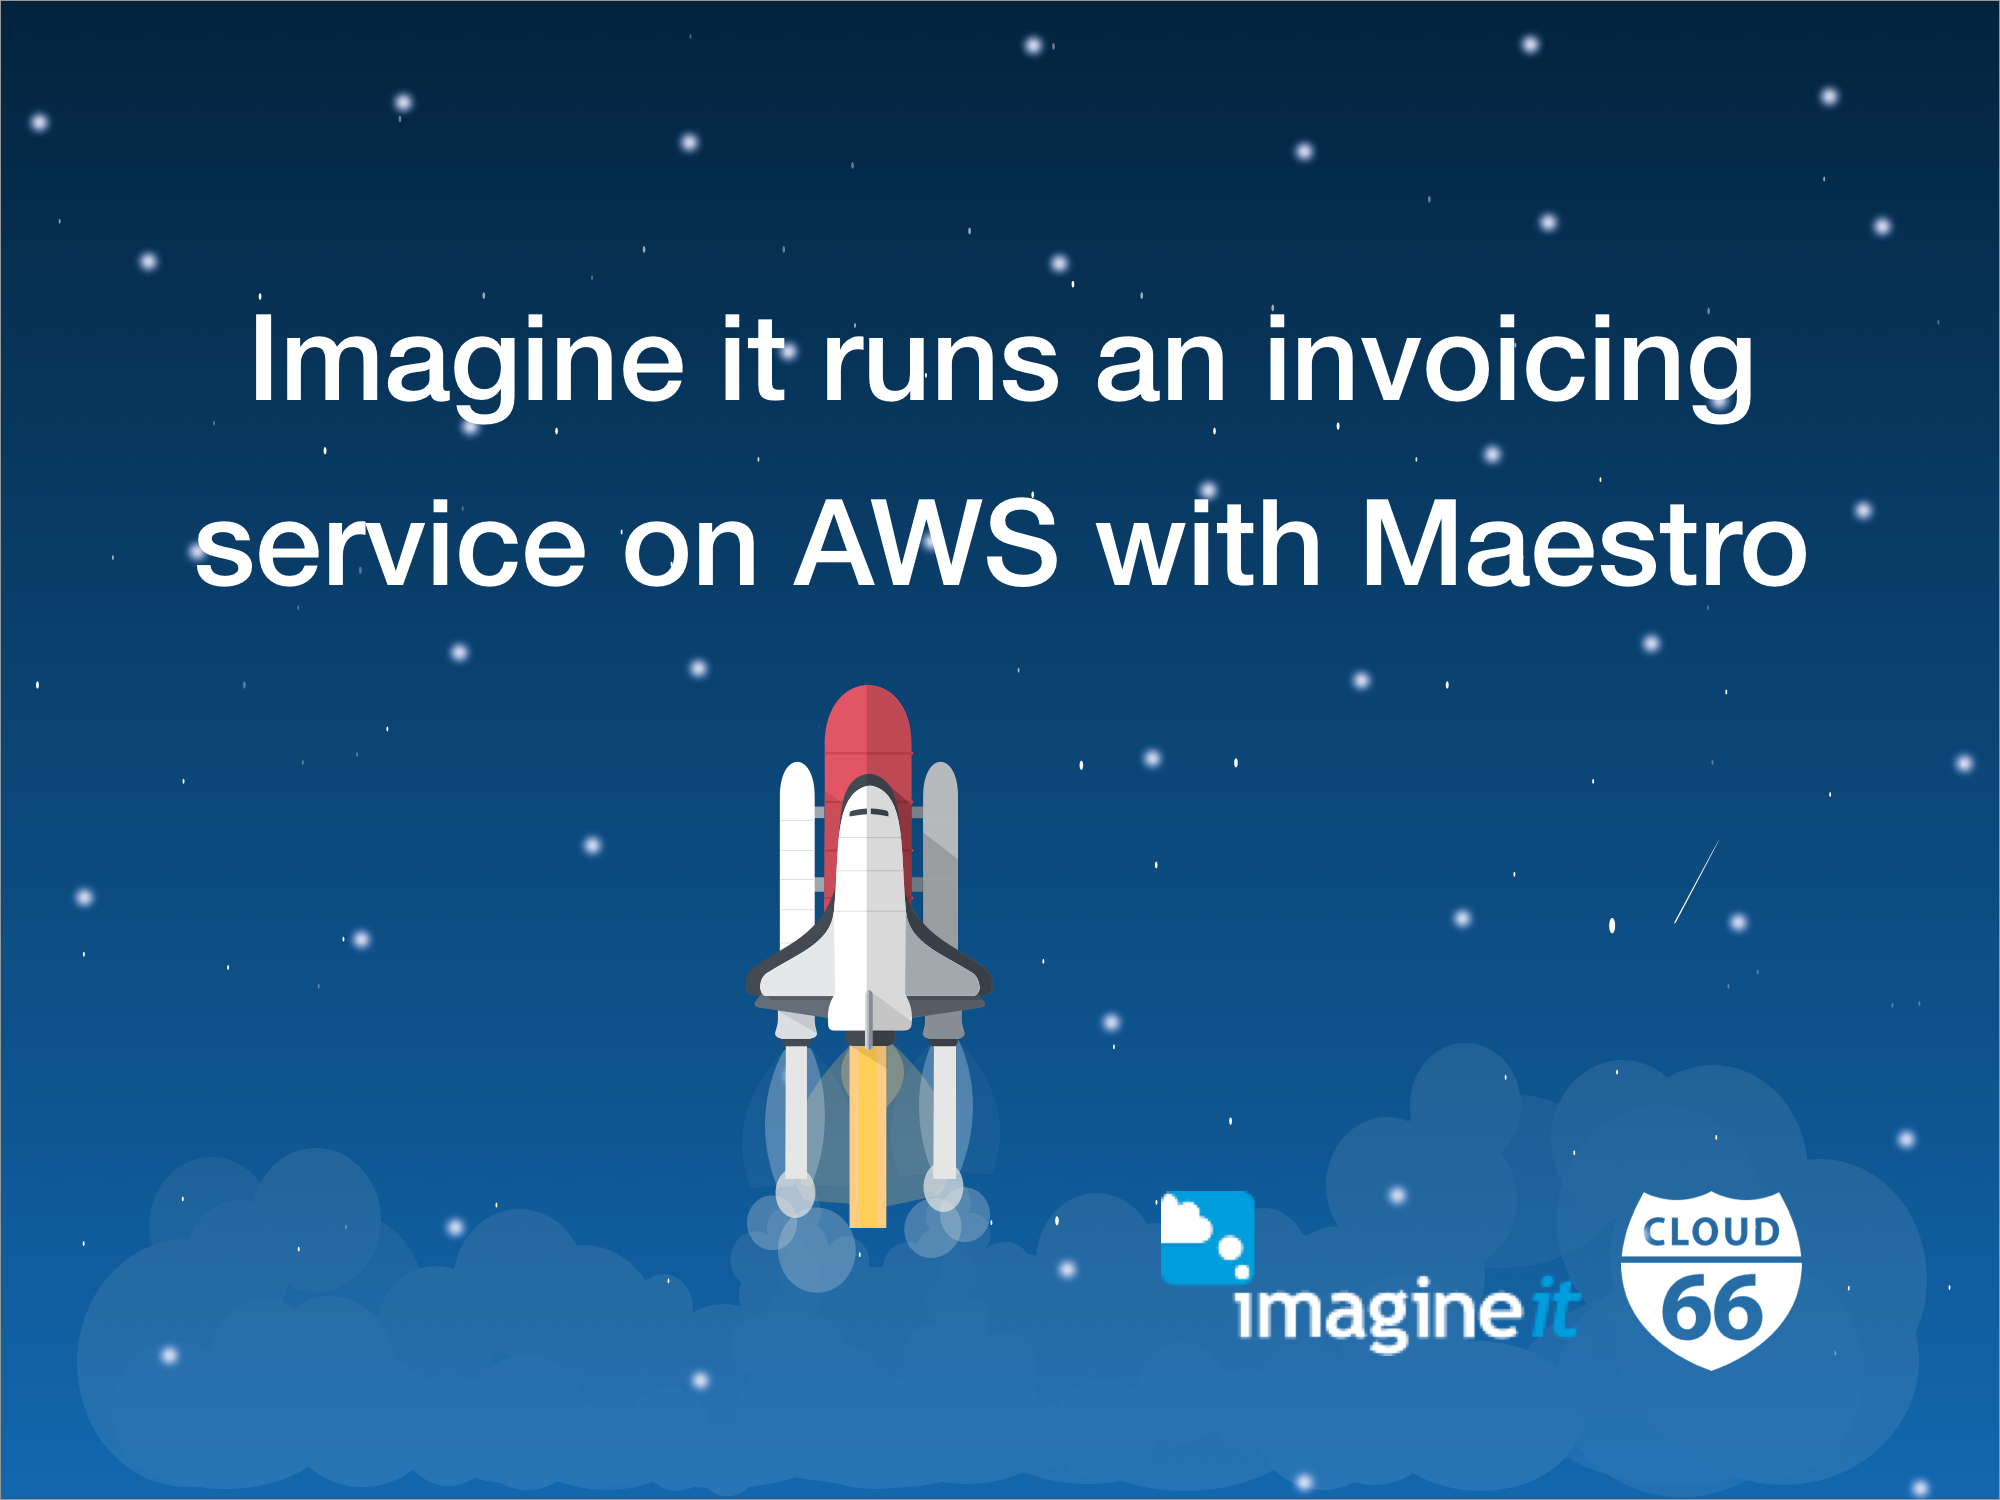 imagine-it-runs-an-invoicing-service-on-aws-with-maestro